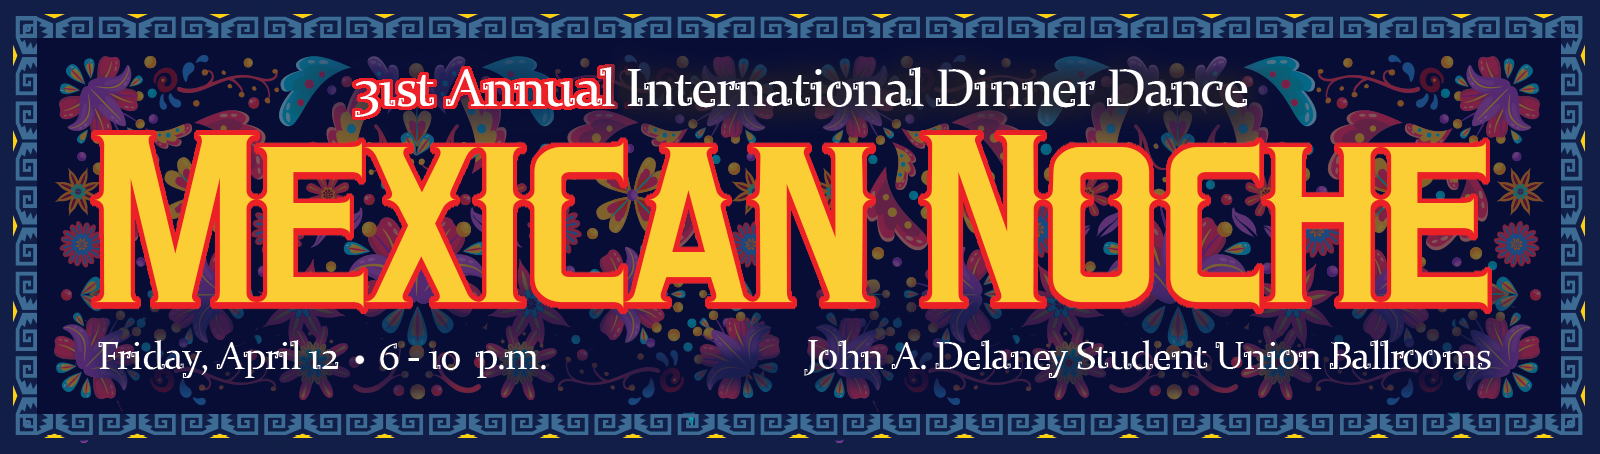 Party background text of 31st Annual International Dinner Dance Mexican Noche April 12 6-10 pm Student Union Ballrooms